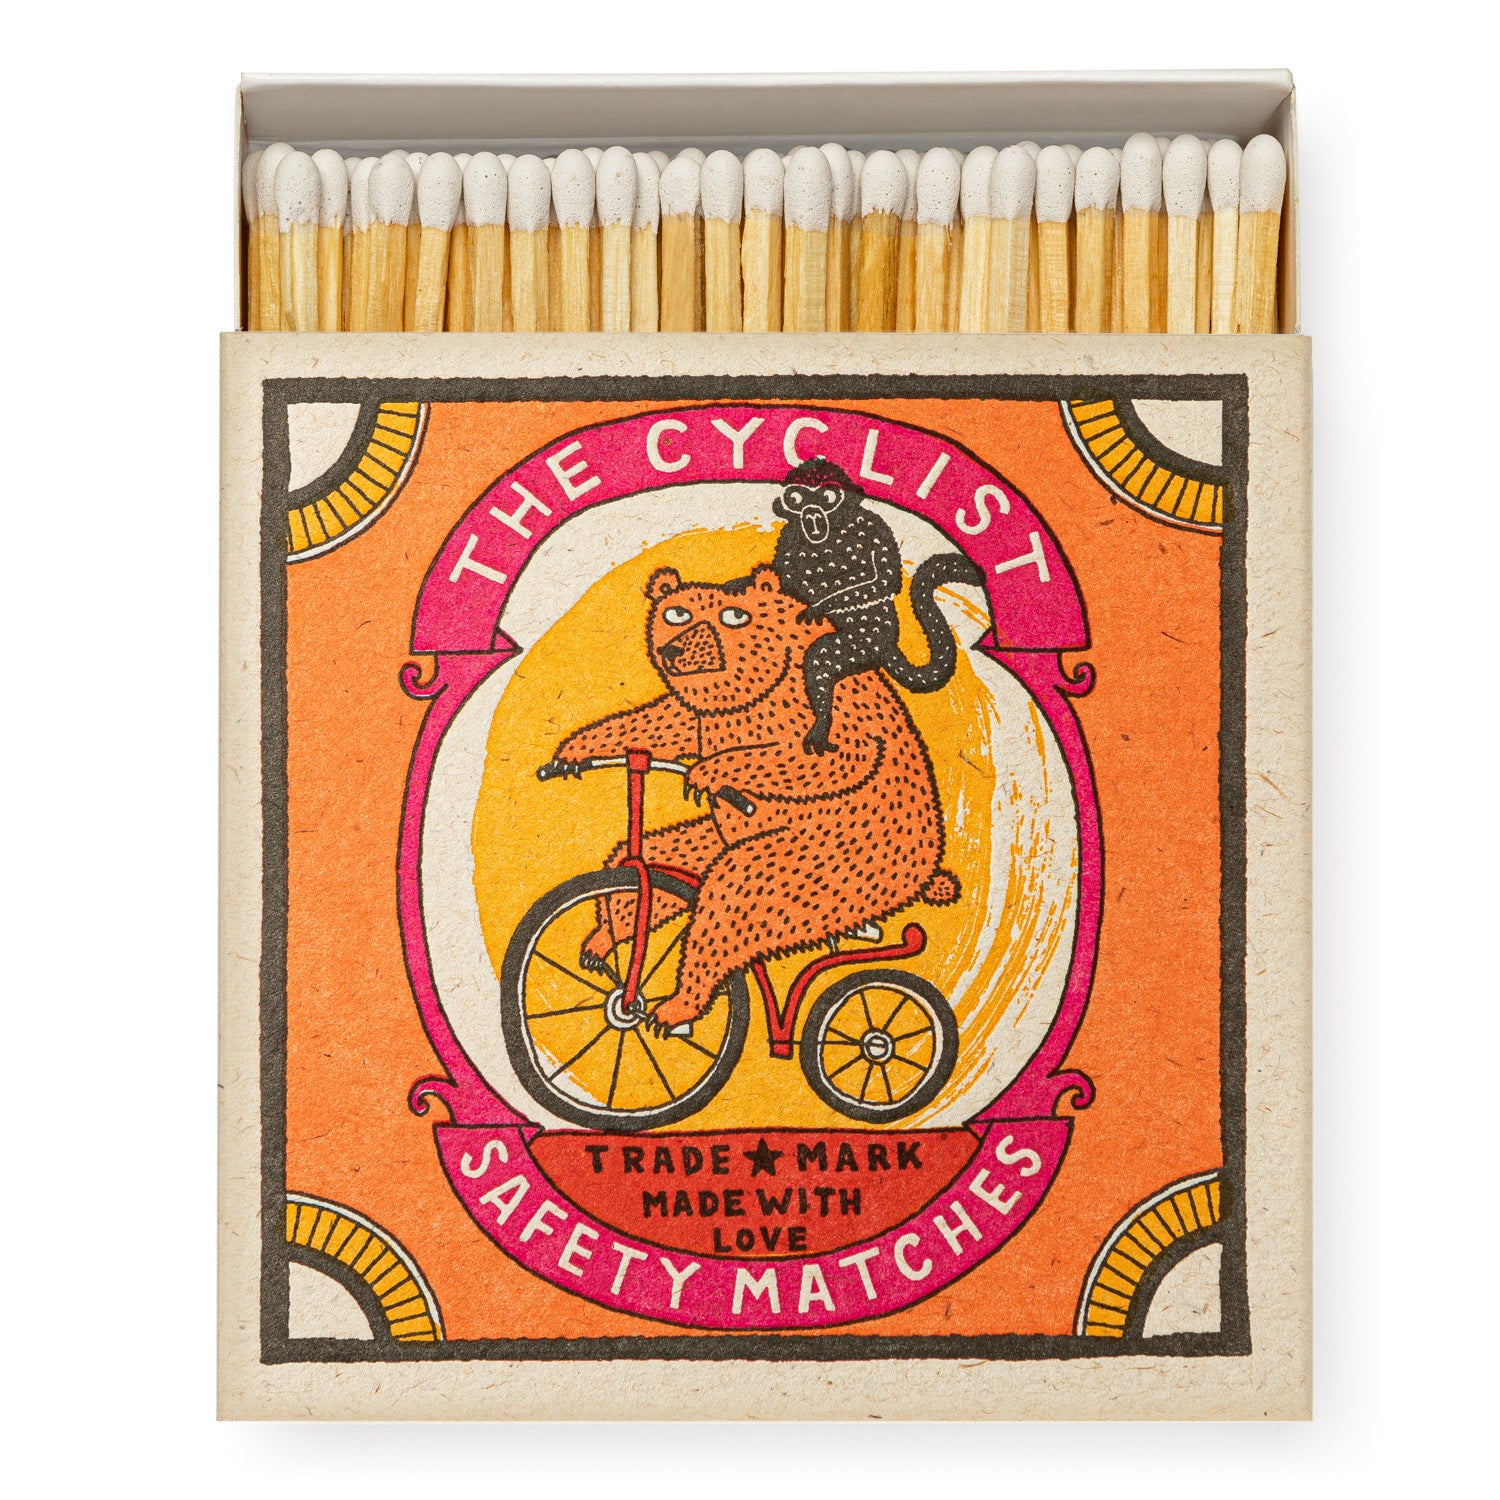 Archivist Gallery The Cyclist Luxury Matches